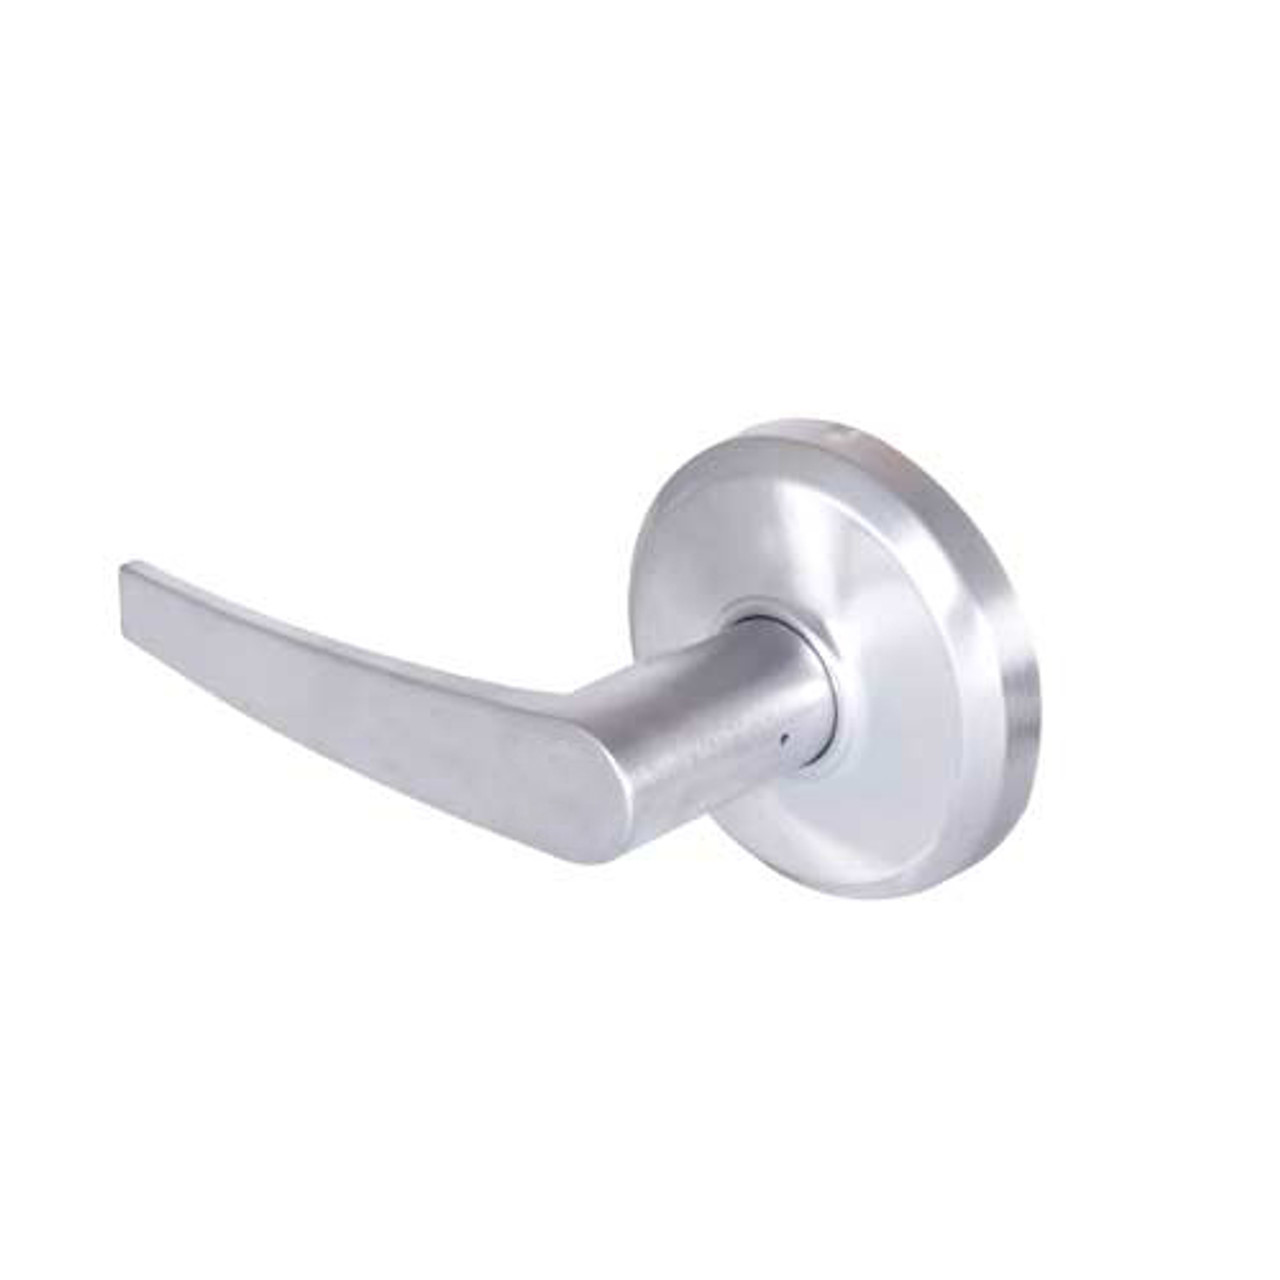 QCL235A625FS4FLS Stanley QCL200 Series Cylindrical Communicating Lock with Slate Lever in Bright Chrome Finish